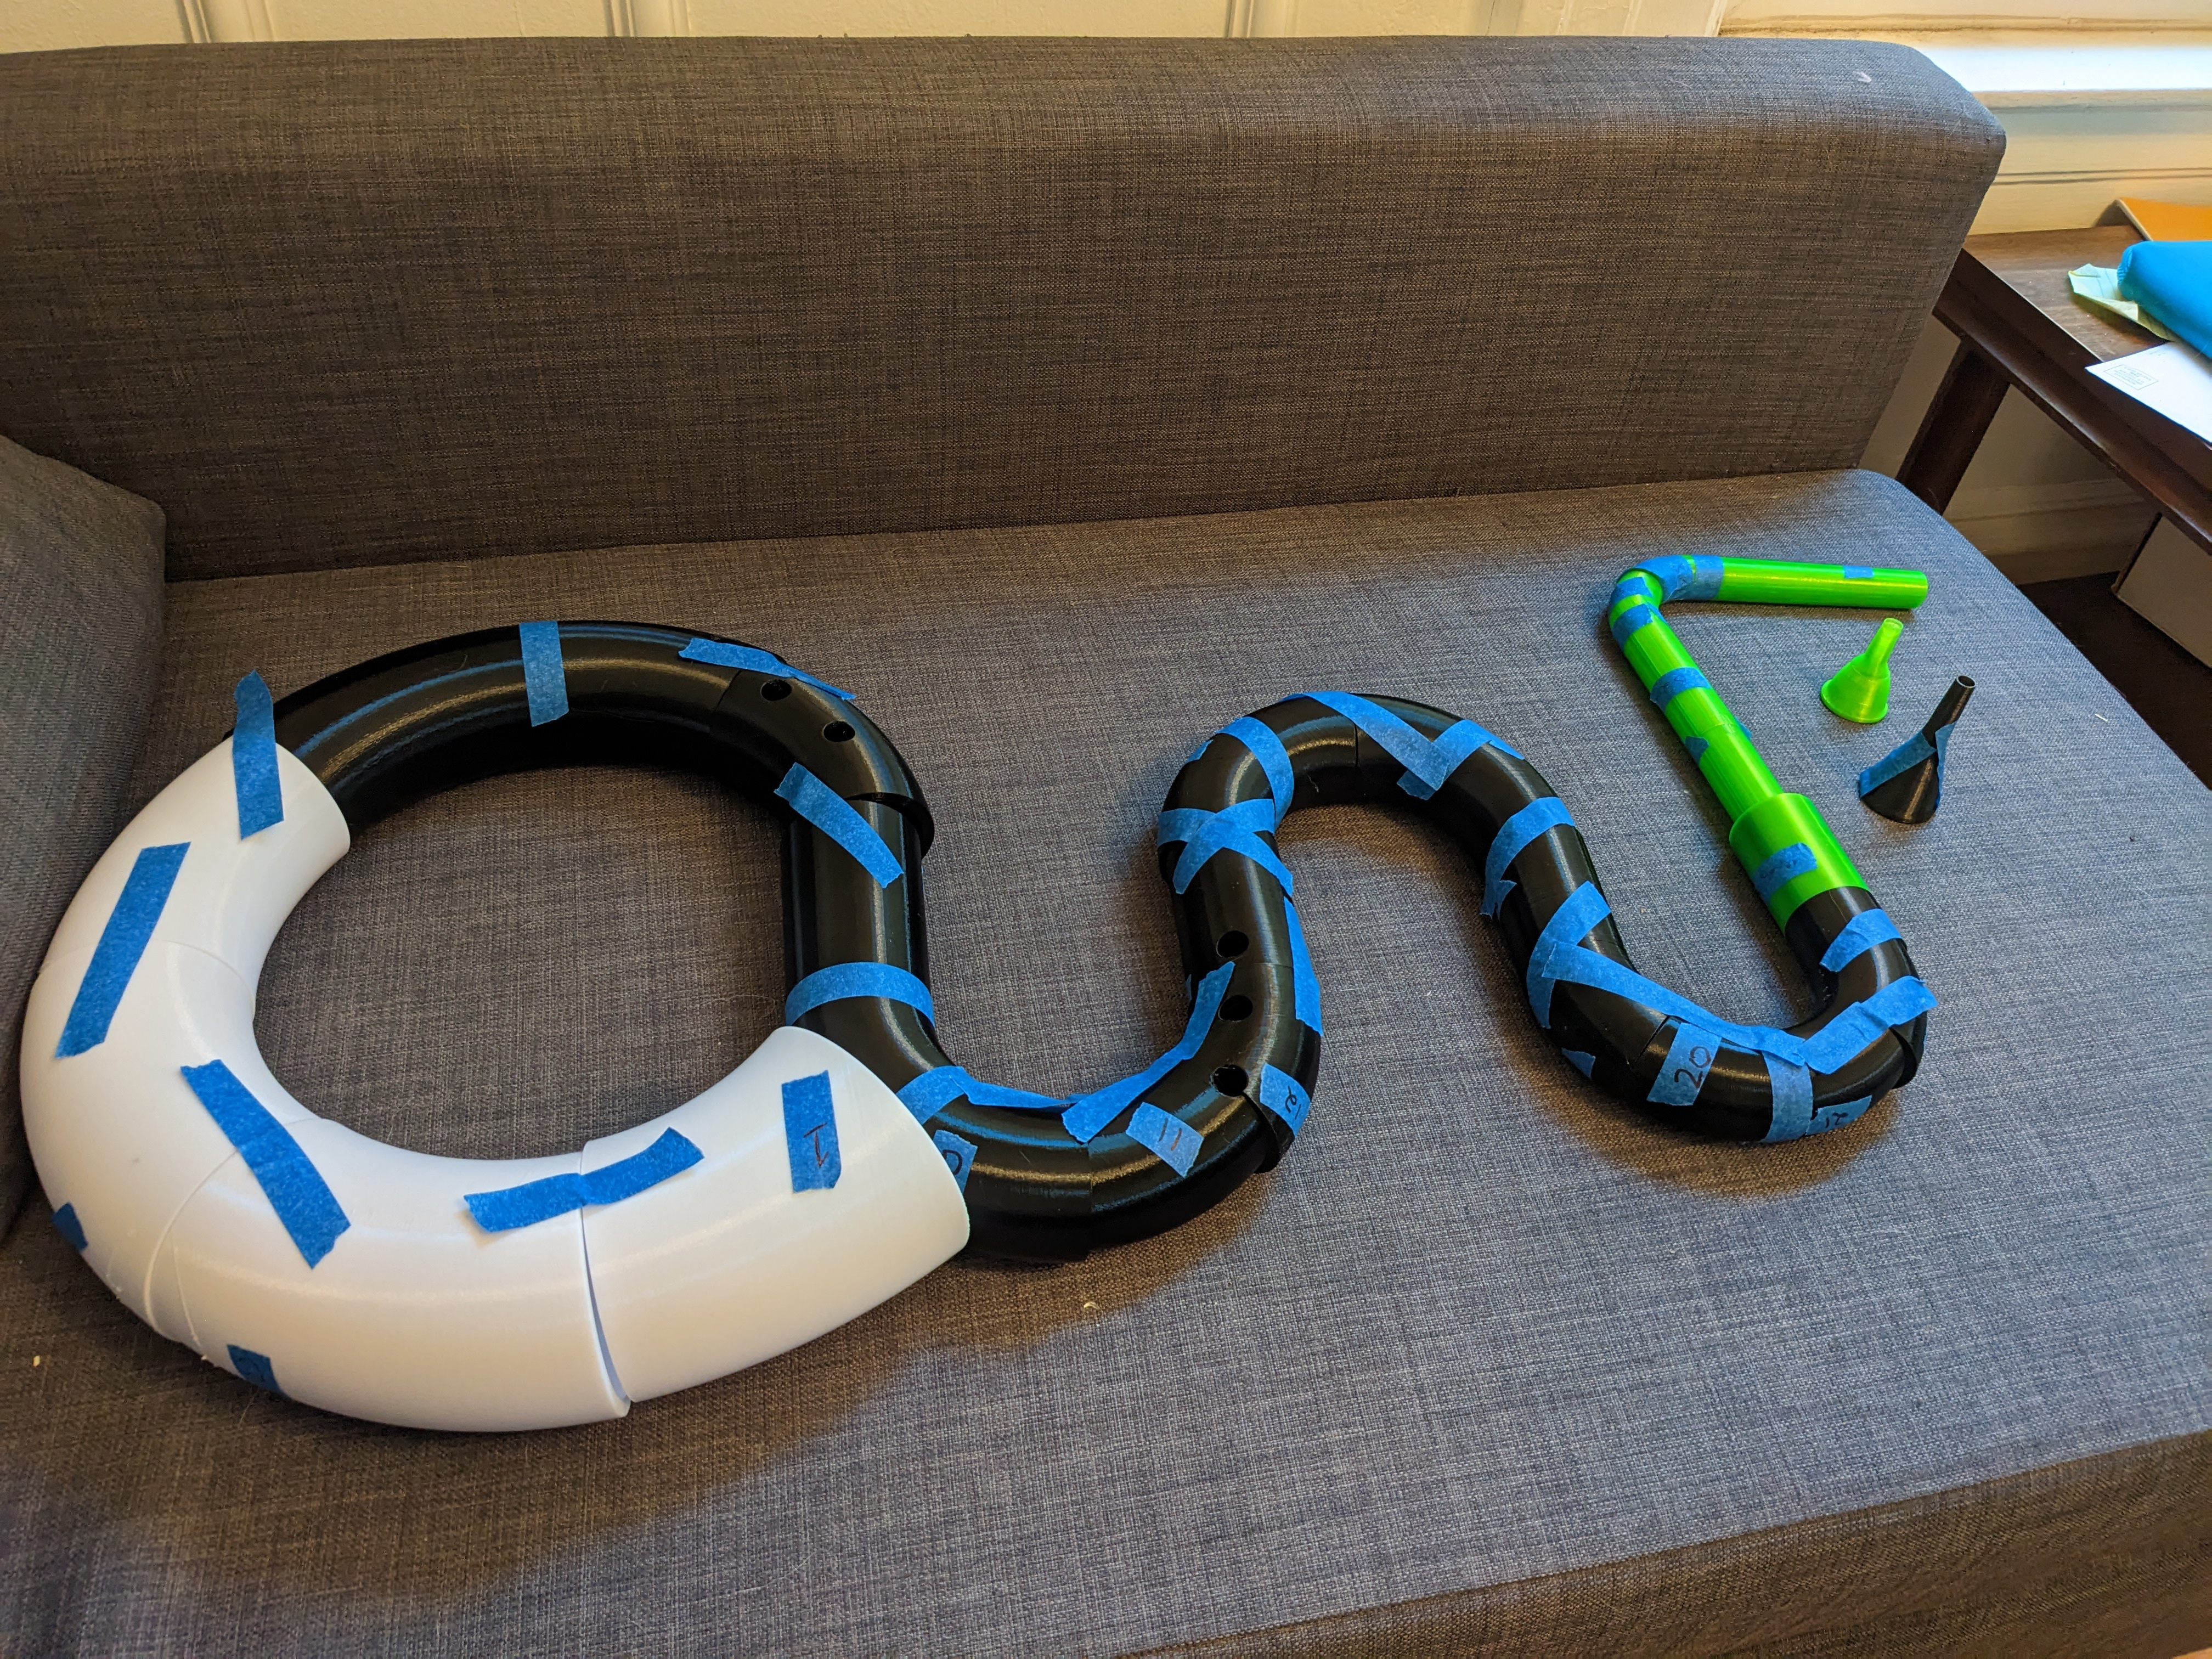 Serpent pieces taped together with blue tape on gray couch